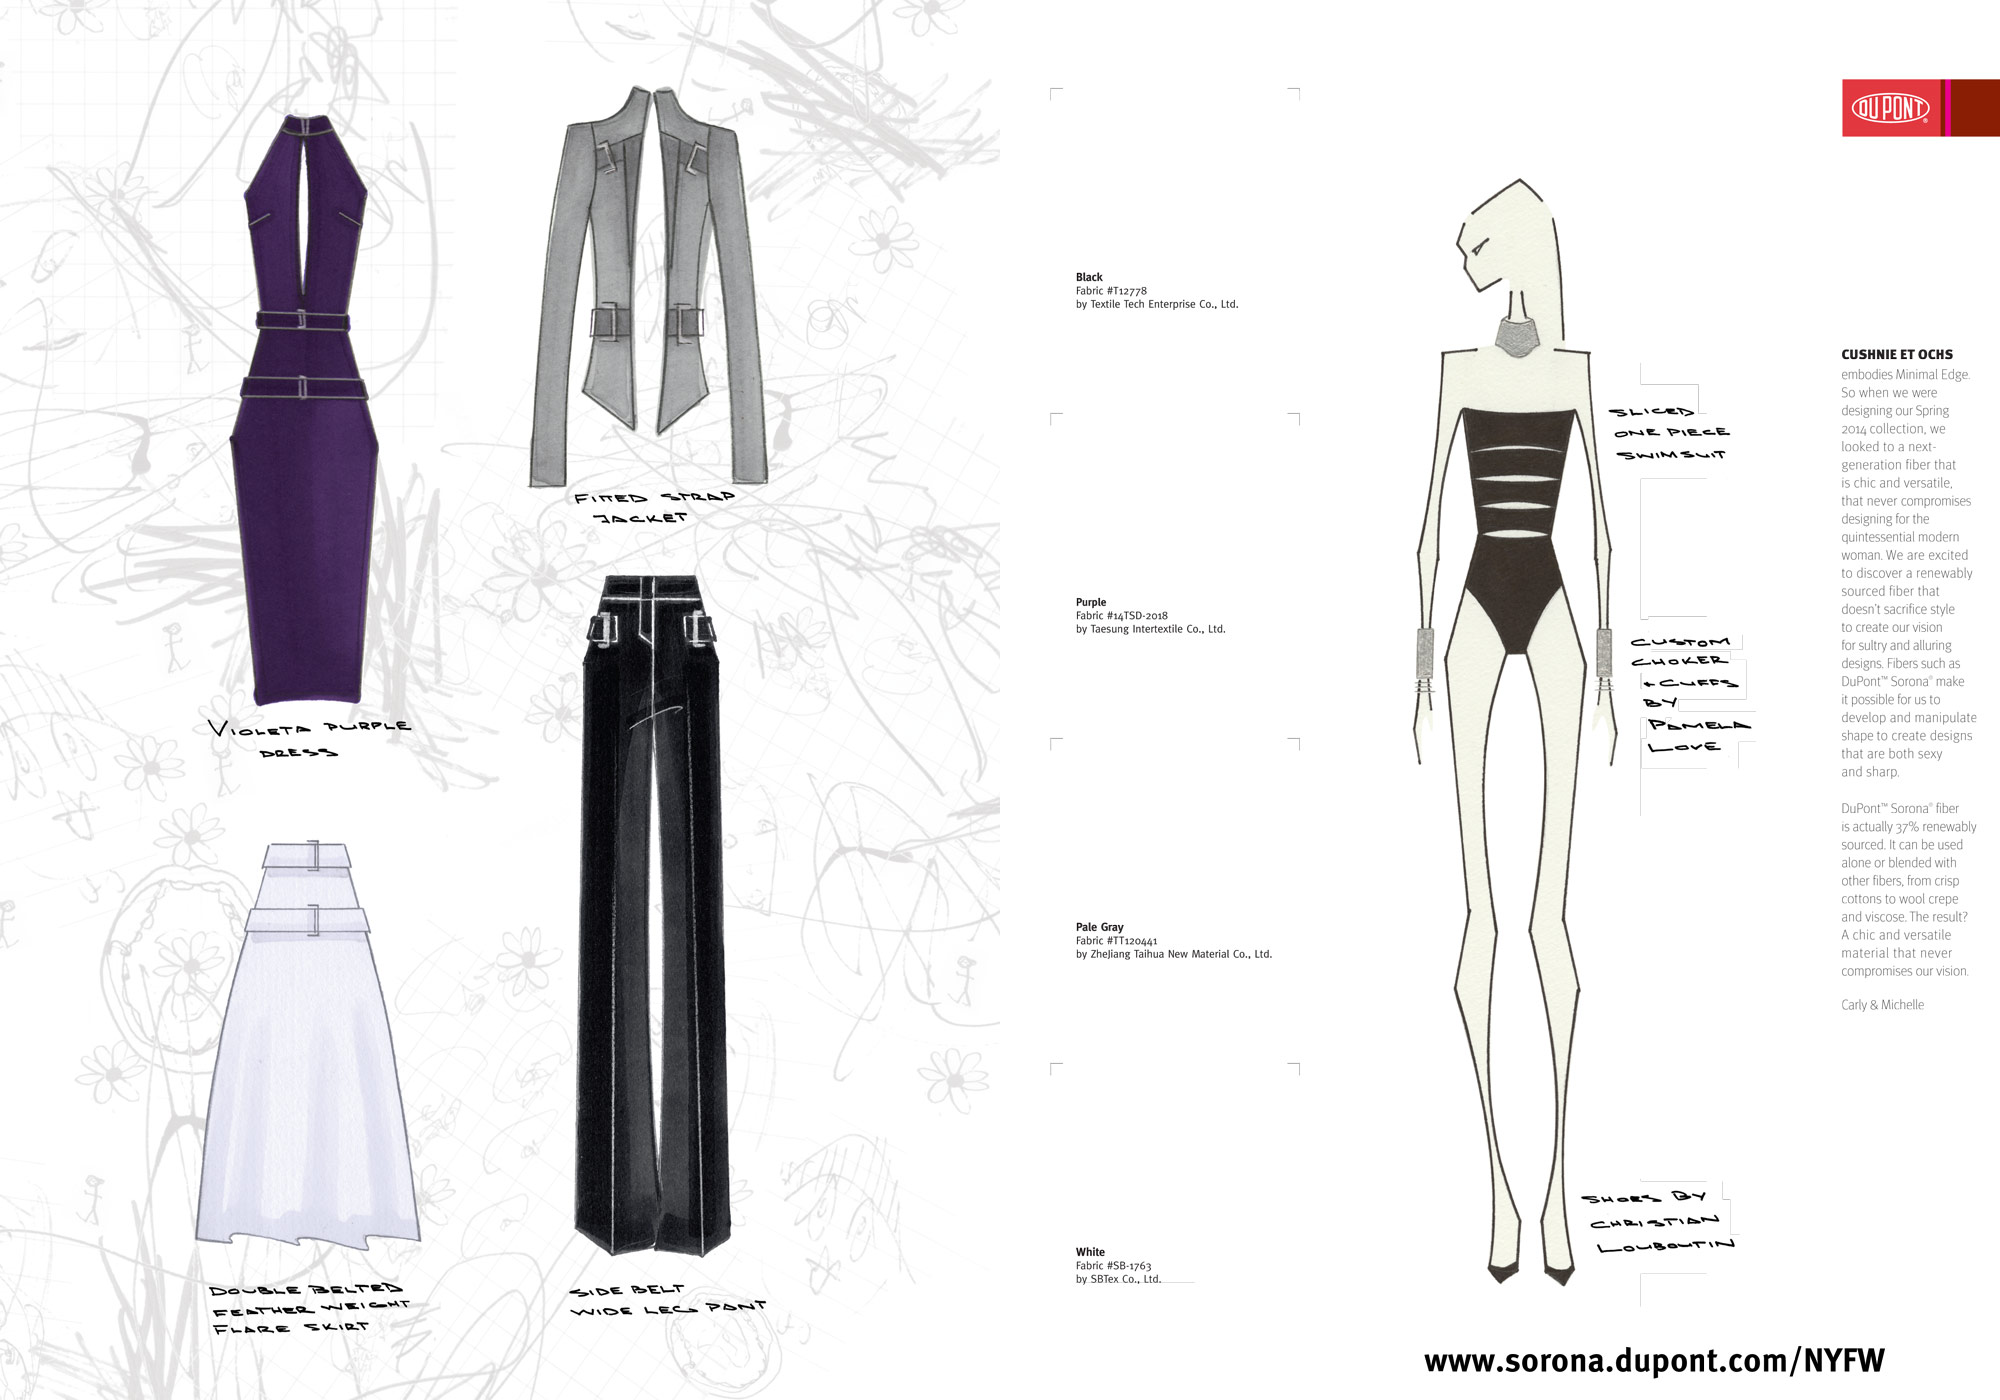 From pen and paper to the runway! Check out our new design inspired by fabric made from DuPont™ Sorona® fiber.